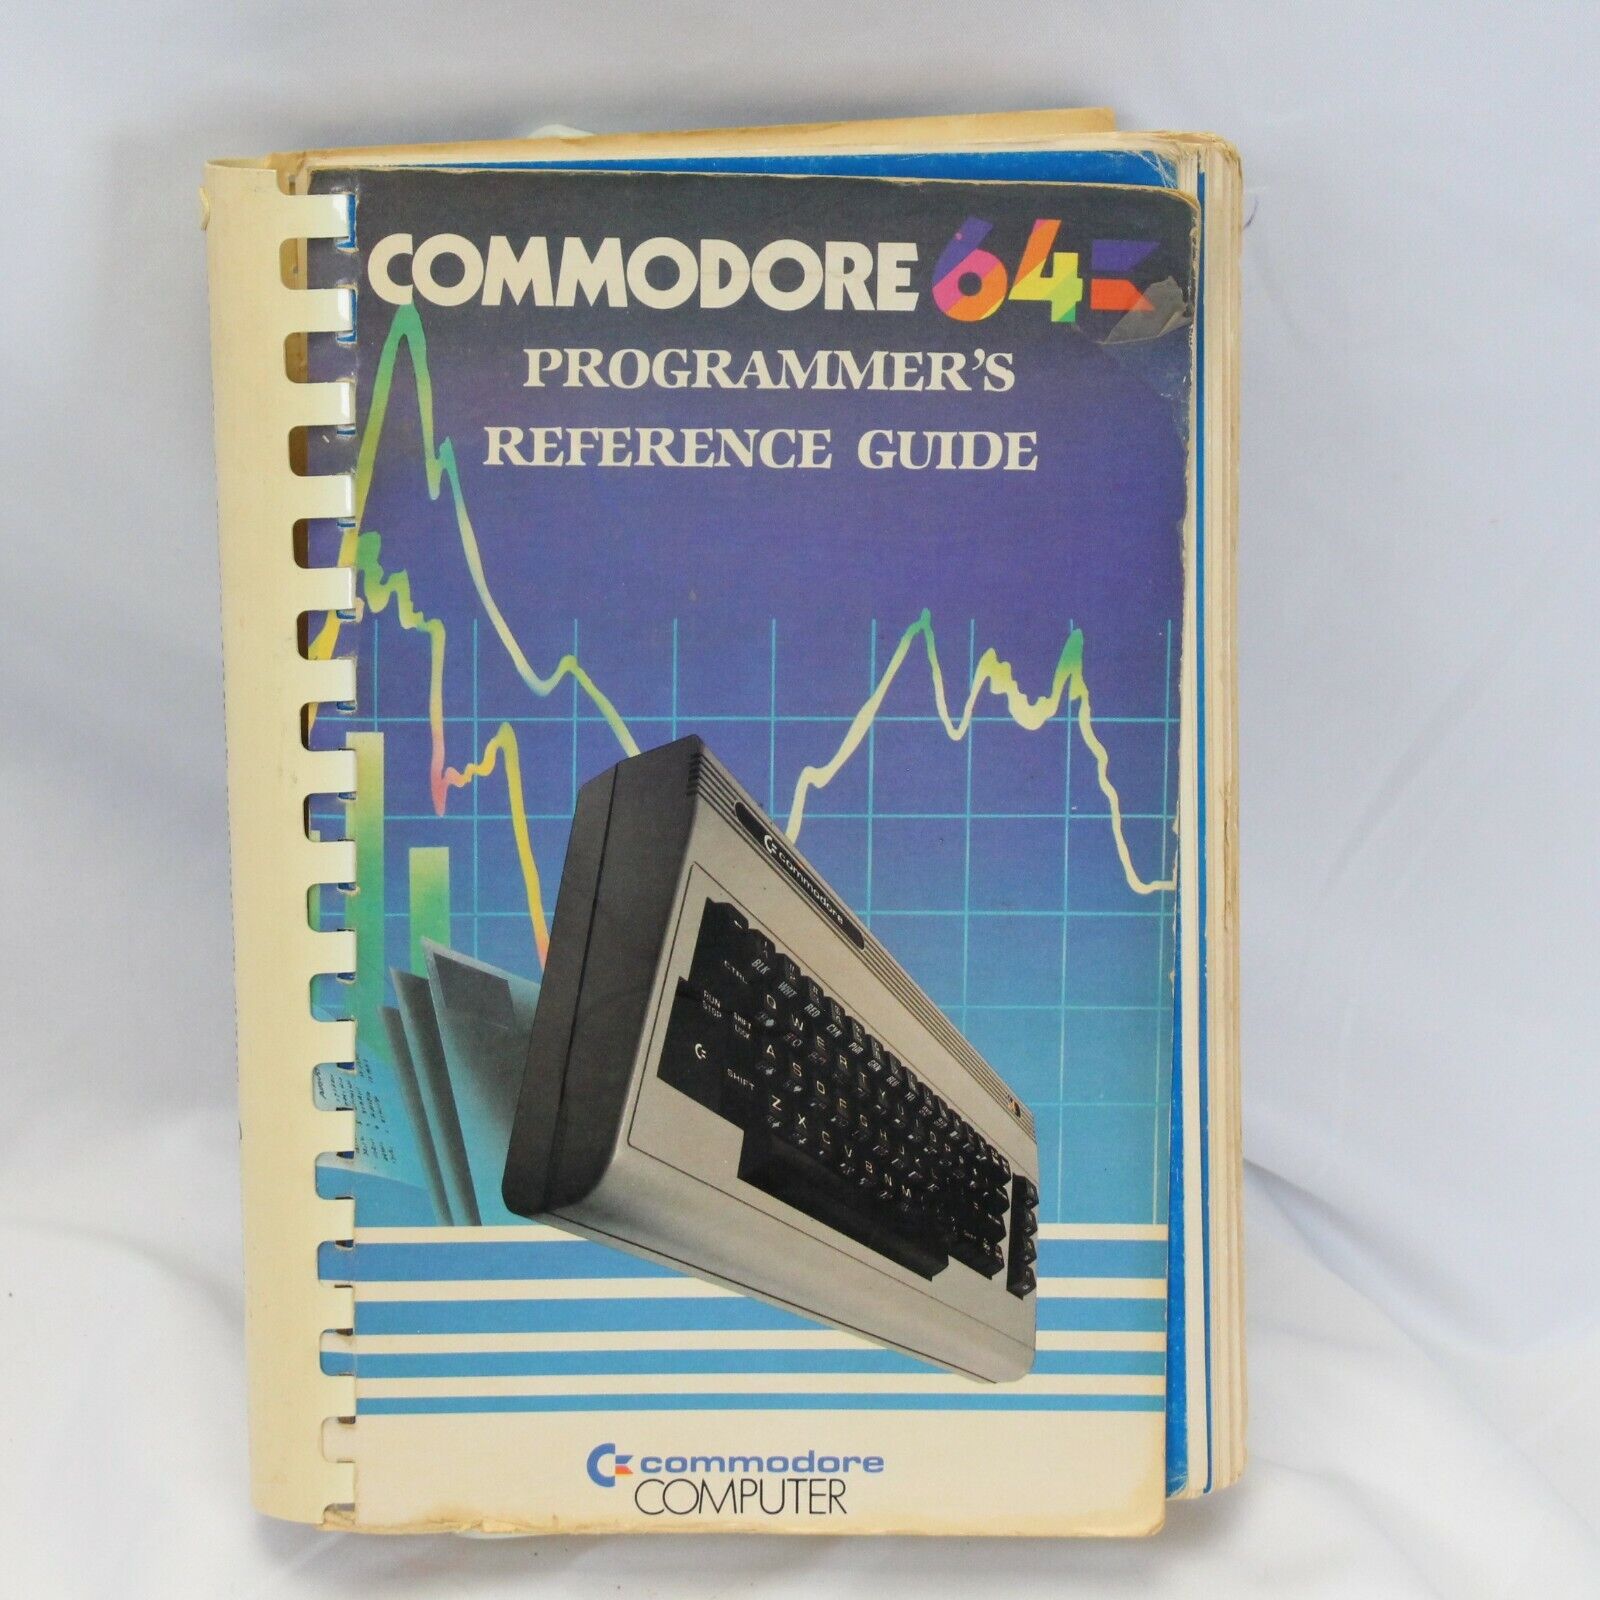 Commodore 64 Programmer’s Reference Guide First Edition 1st Print 1982